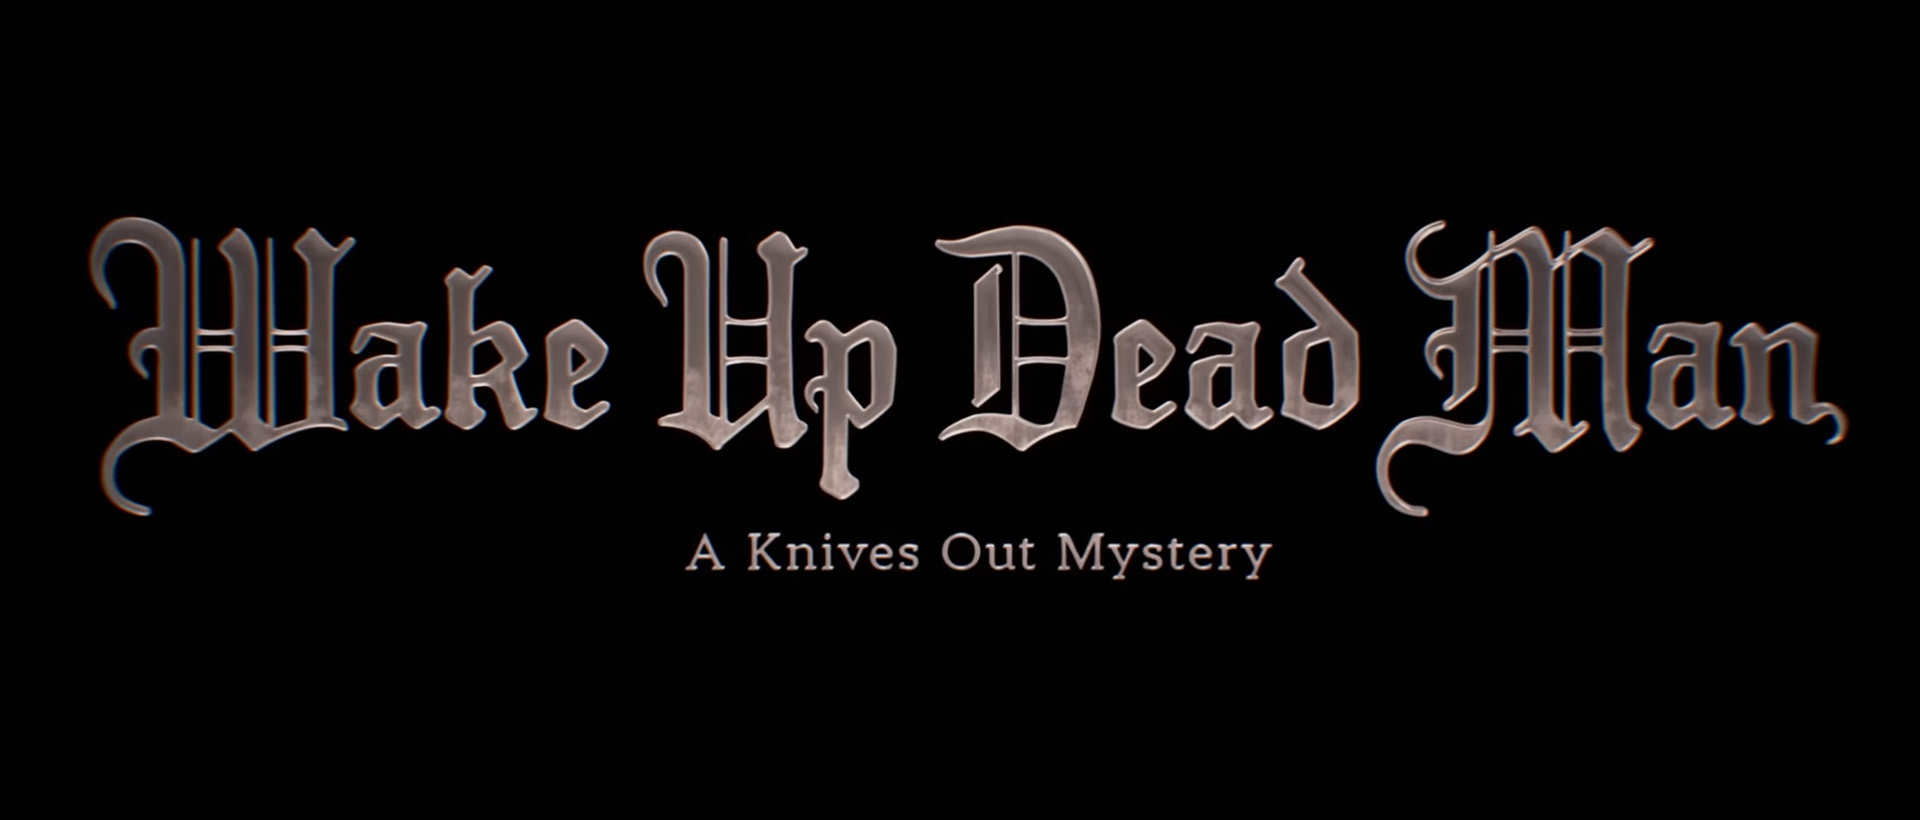 wake up dead man knives out banner